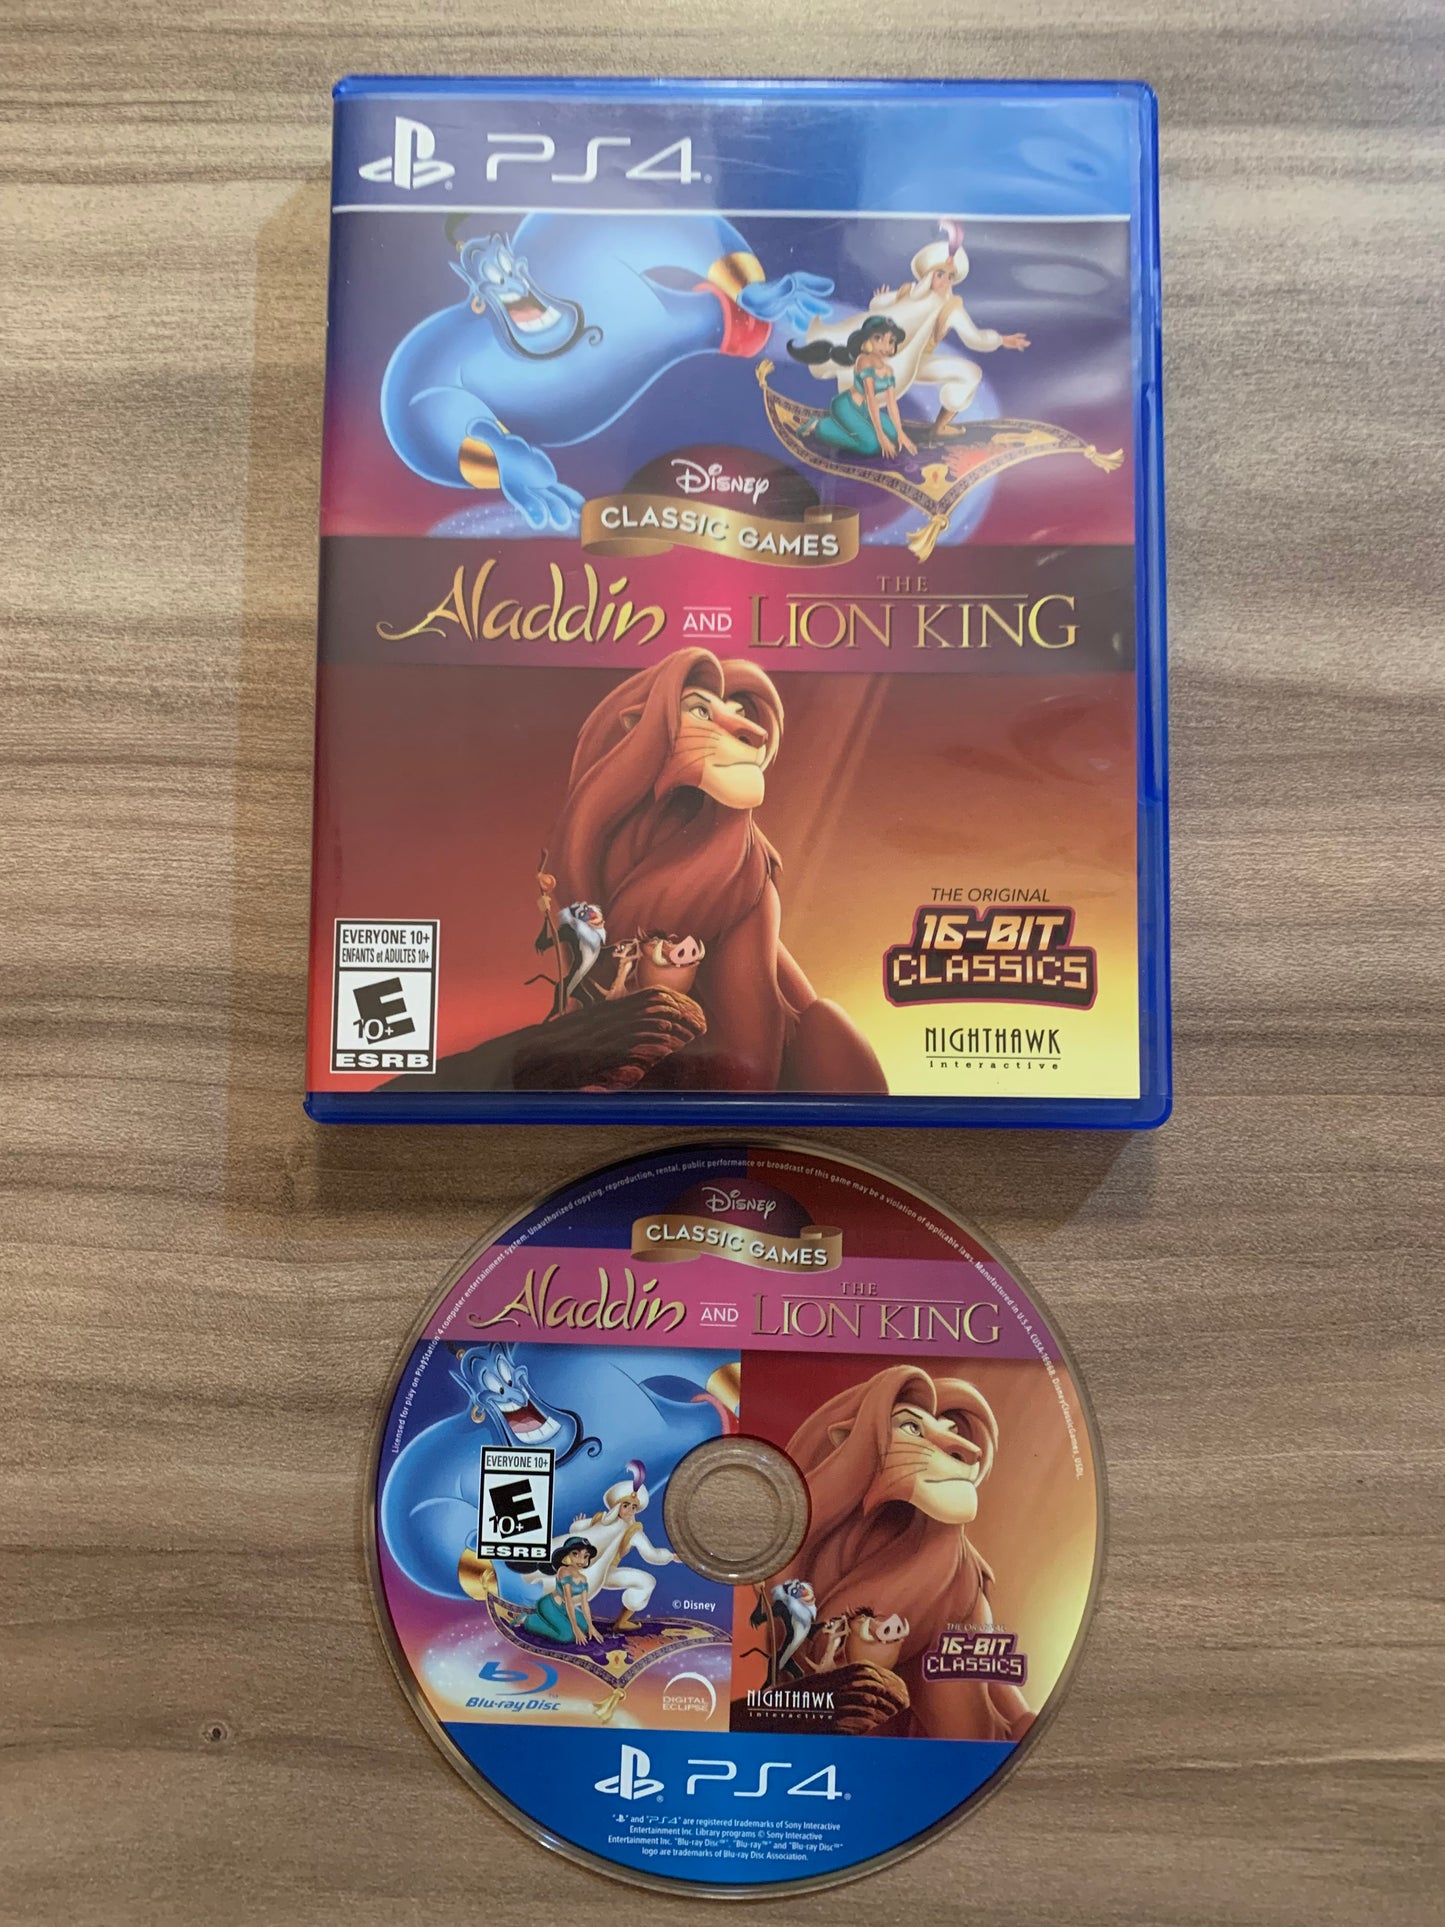 PiXEL-RETRO.COM : SONY PLAYSTATION 4 (PS4) COMPLETE CIB BOX MANUAL GAME NTSC DISNEY CLASSIC GAMES ALADDIN AND THE LION KING